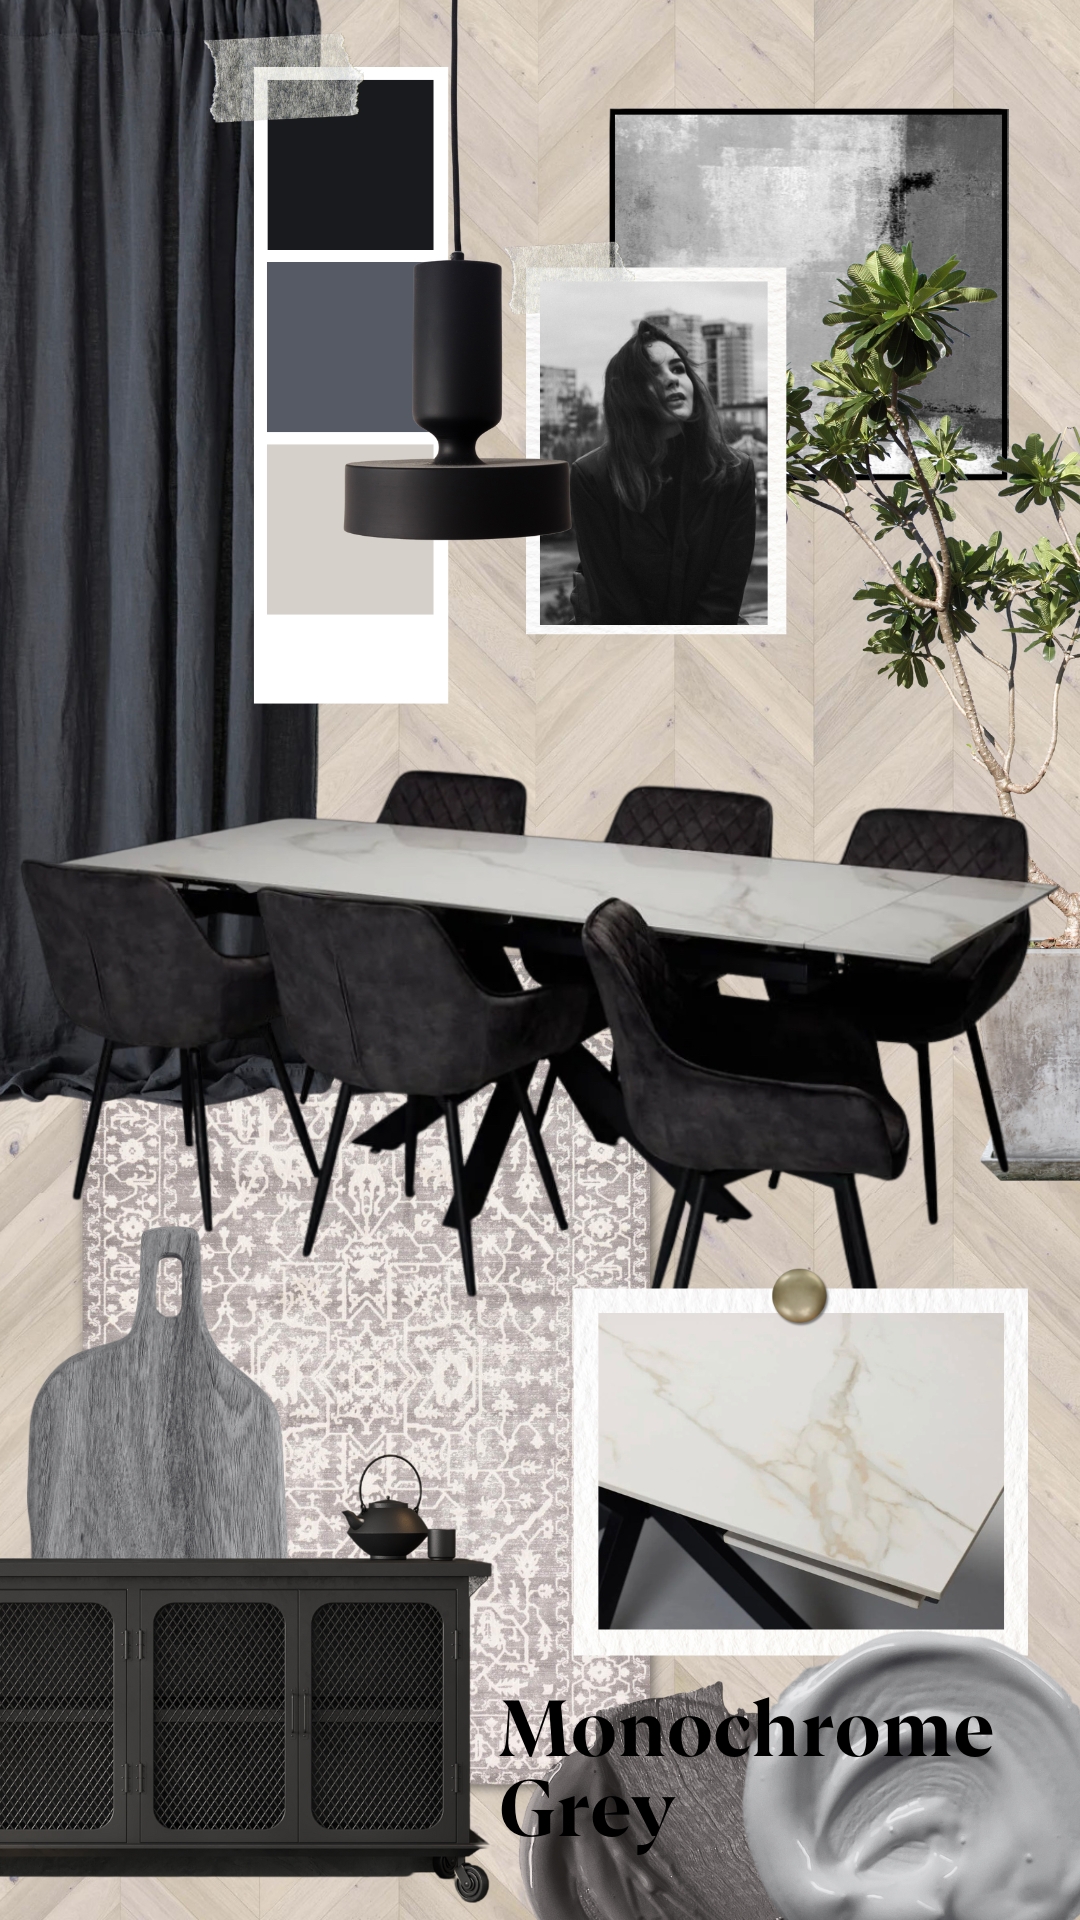 Extendable Stone Dining Table - Monochrome Grey Mood Board